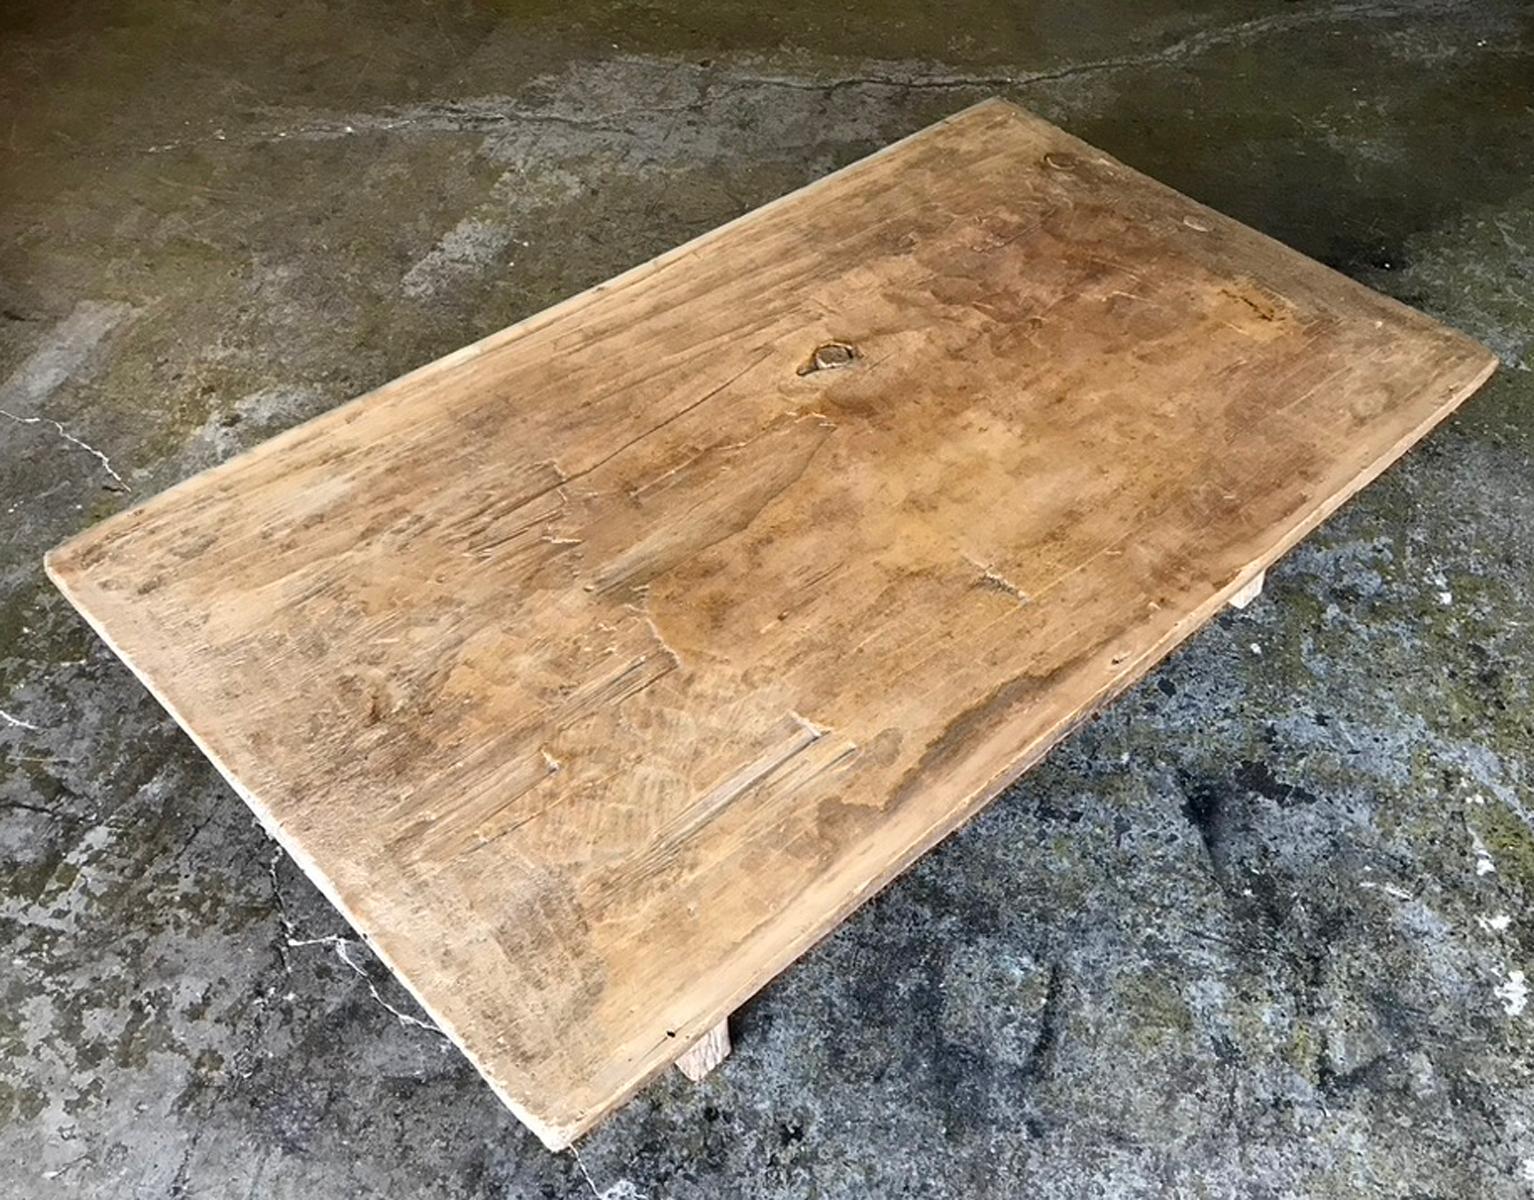 Wood One Wide Antique Board Coffee Table For Sale